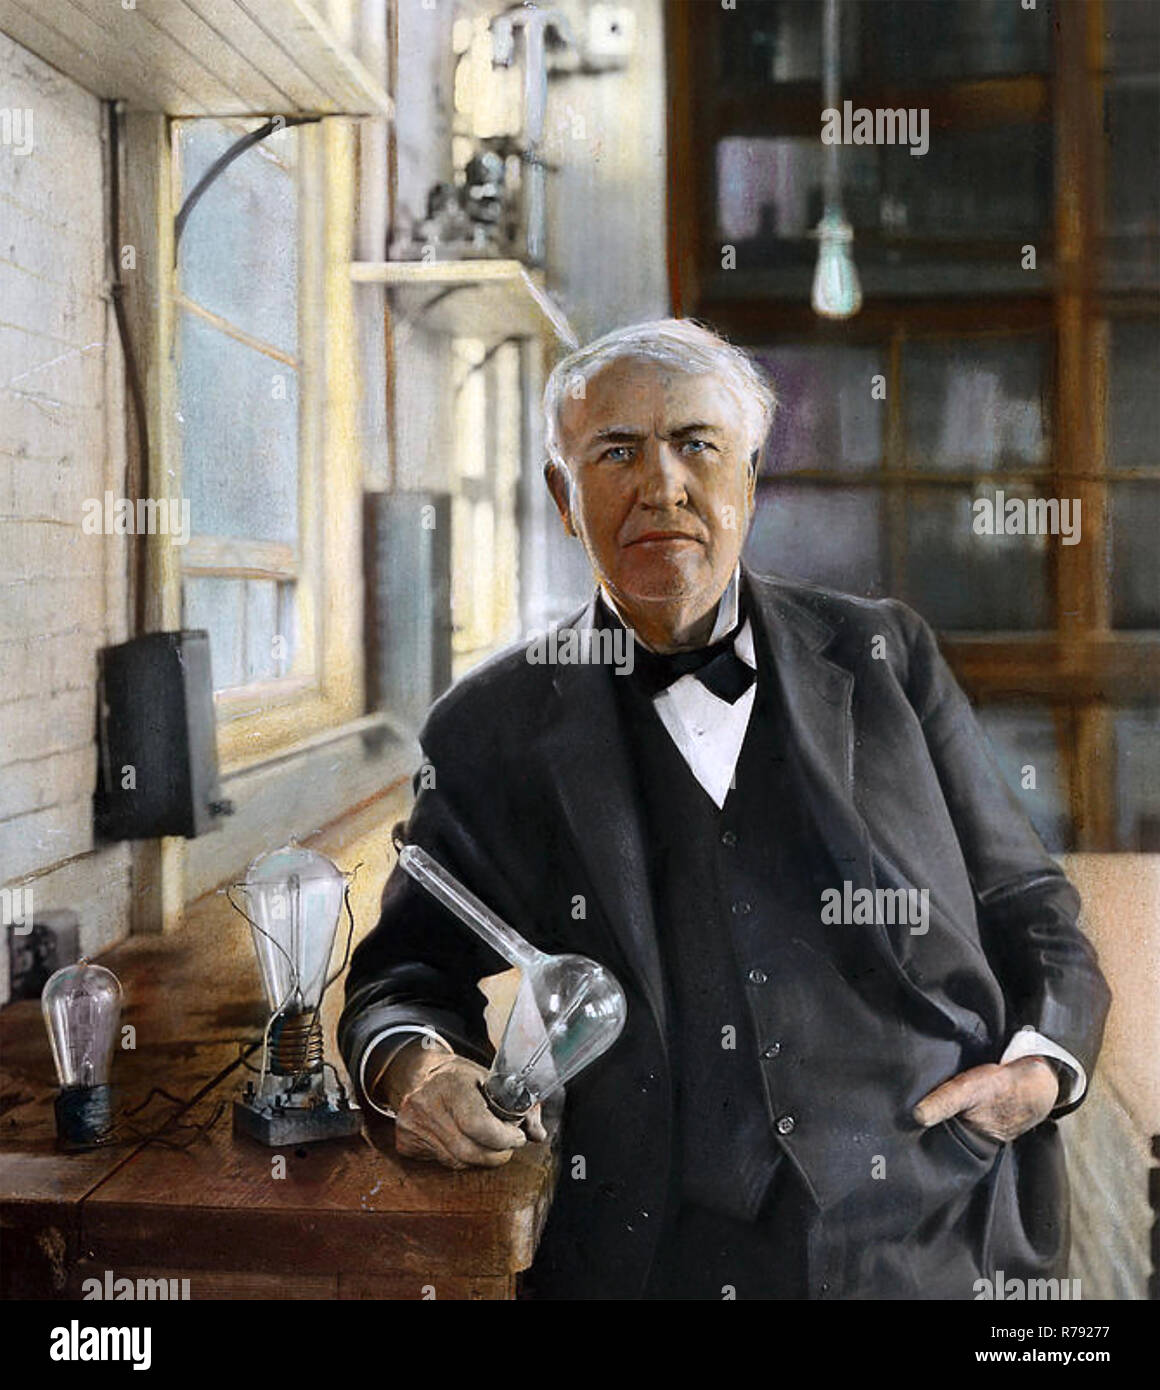 Thomas Edison 1847 1931 American Inventor And Businessman Seen With Some Of His Light Bulb Designs About 1923 In A Hand Tinted Photograph R79277 